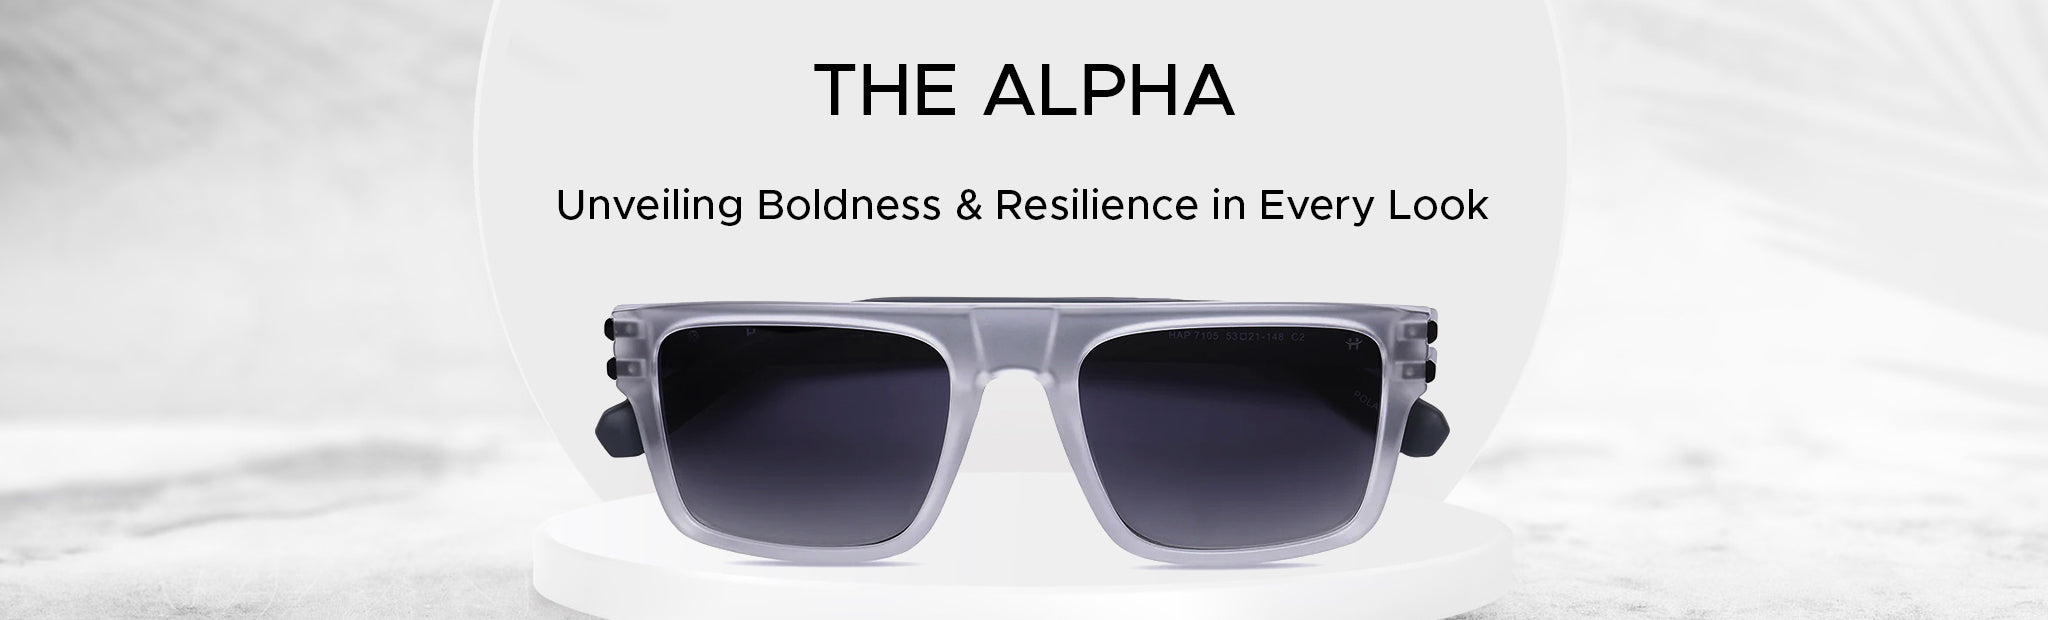 The Alpha Marvel: Unveiling Boldness & Resilience in Every Look